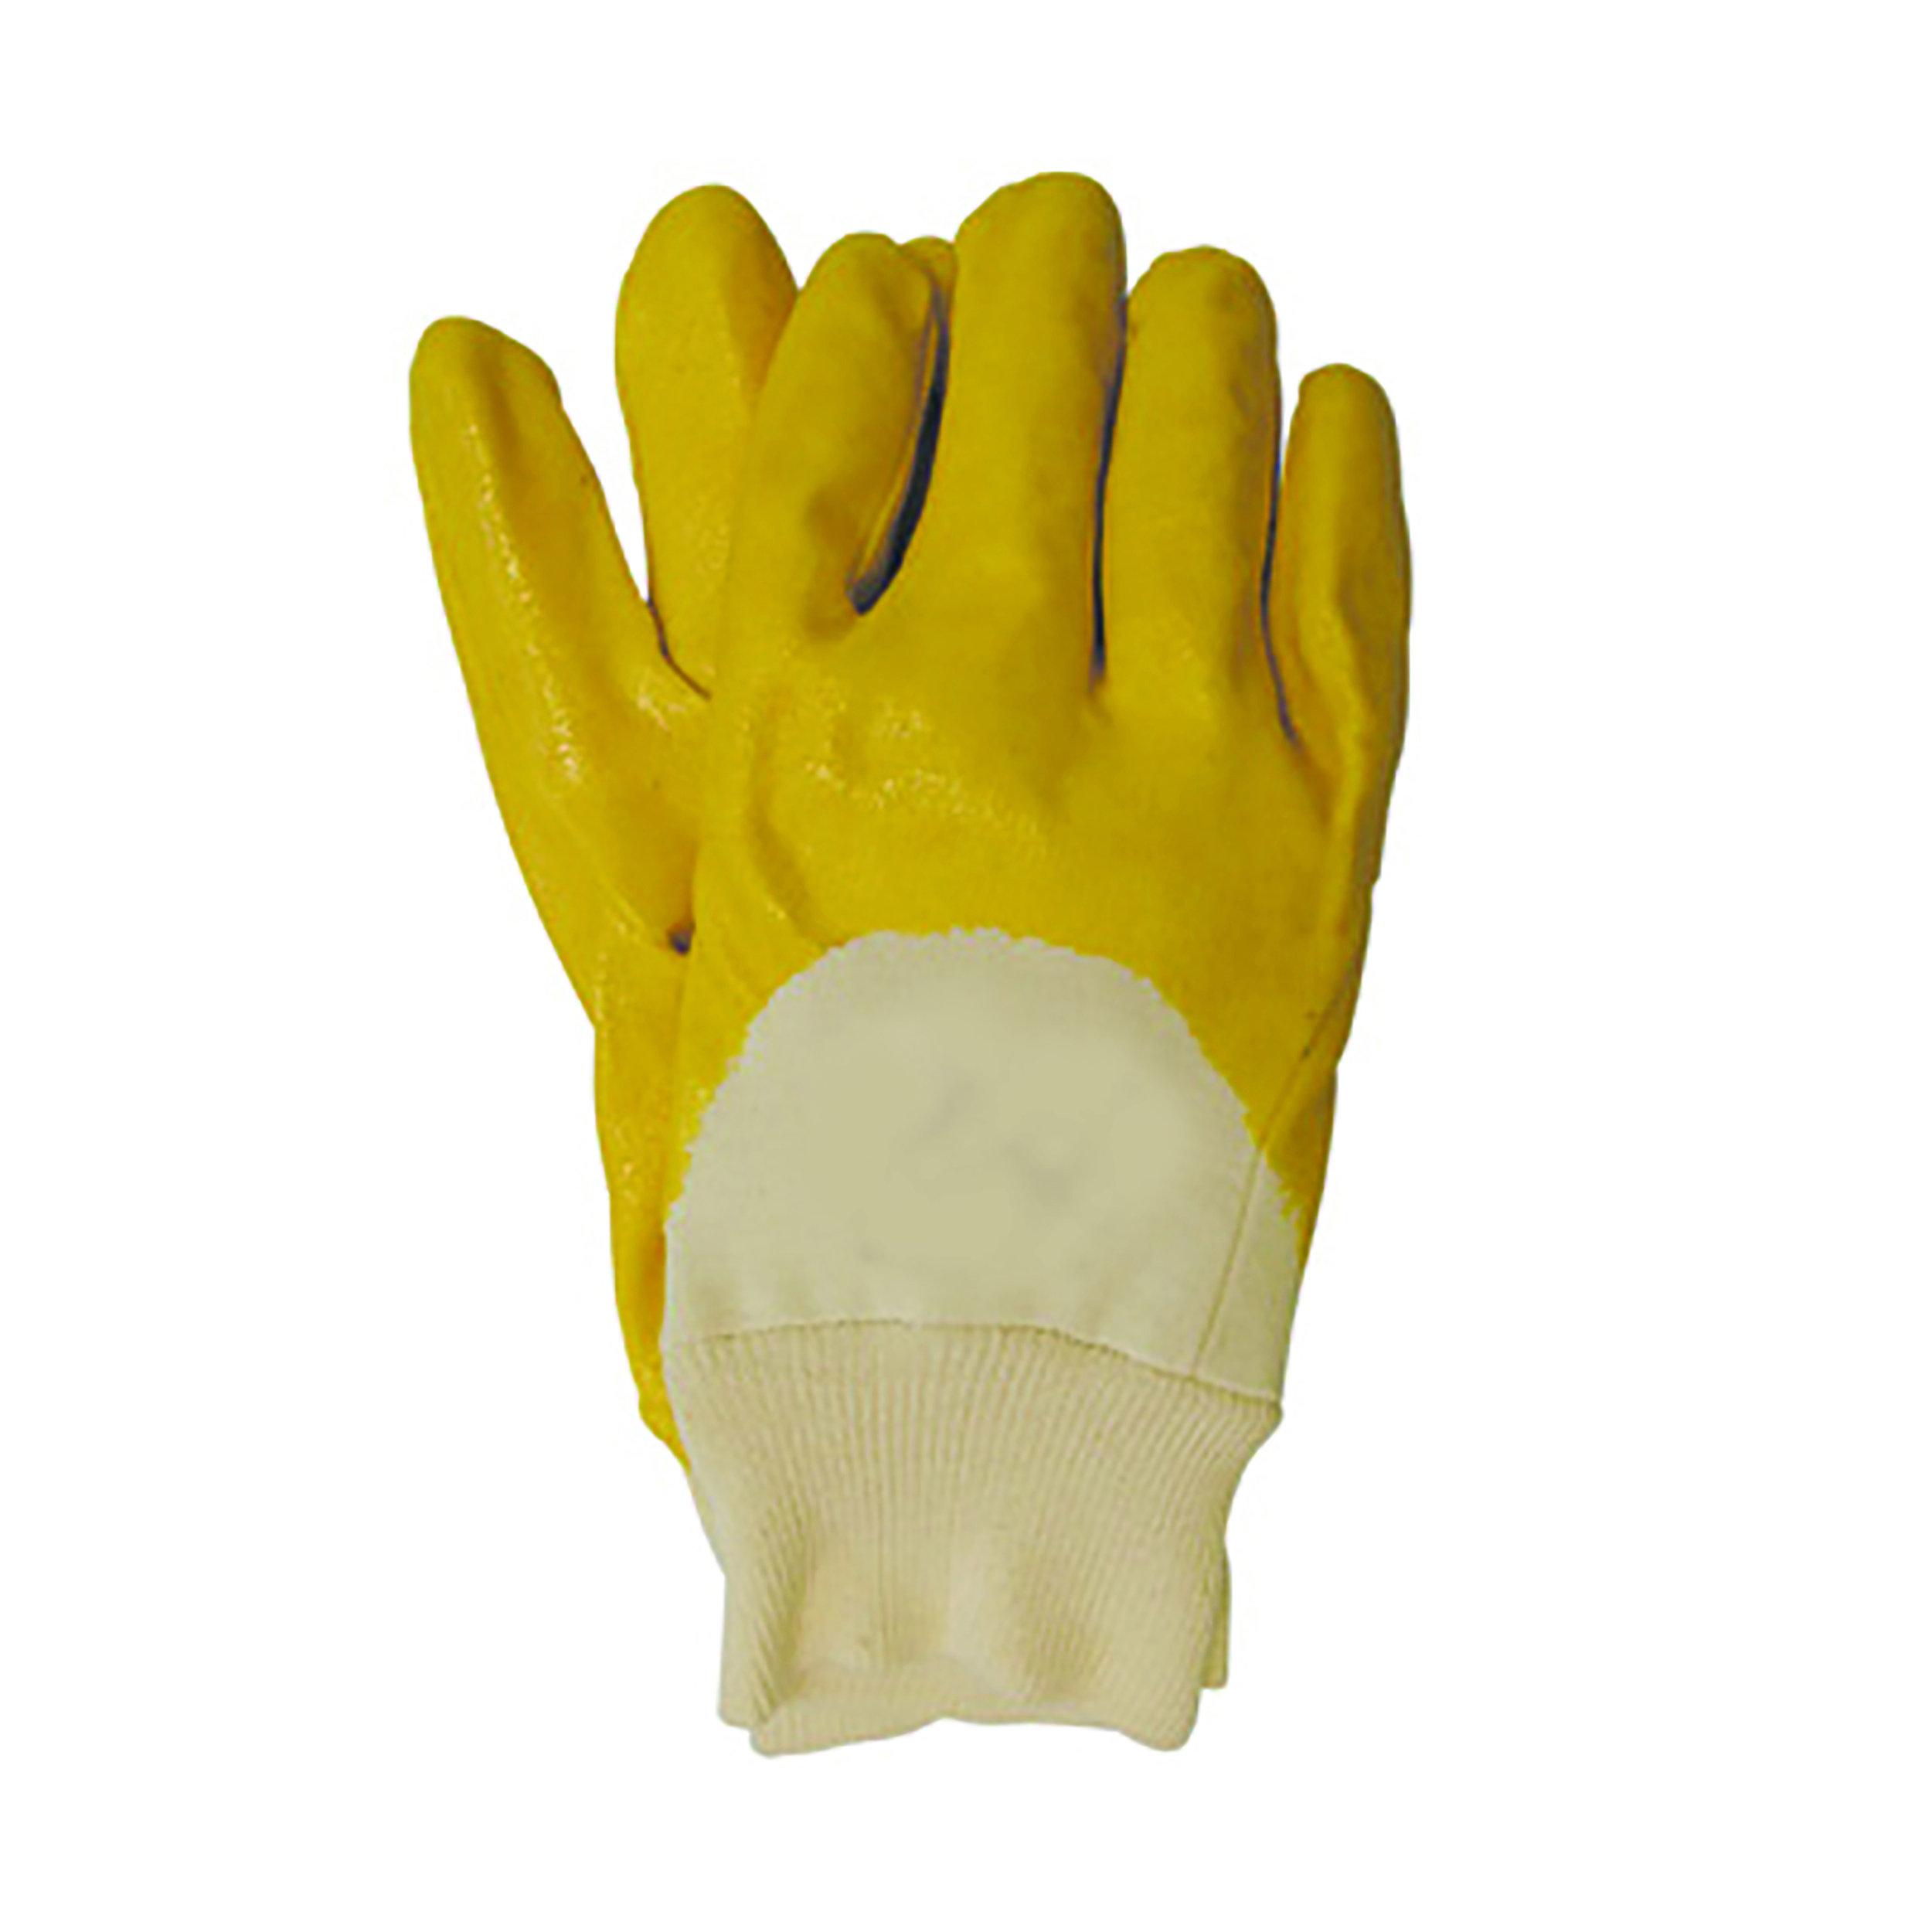 nitril glove, yellow,cotton. For installation and stock works in manual factories ind.,norm: cat.2,EN388,size 9